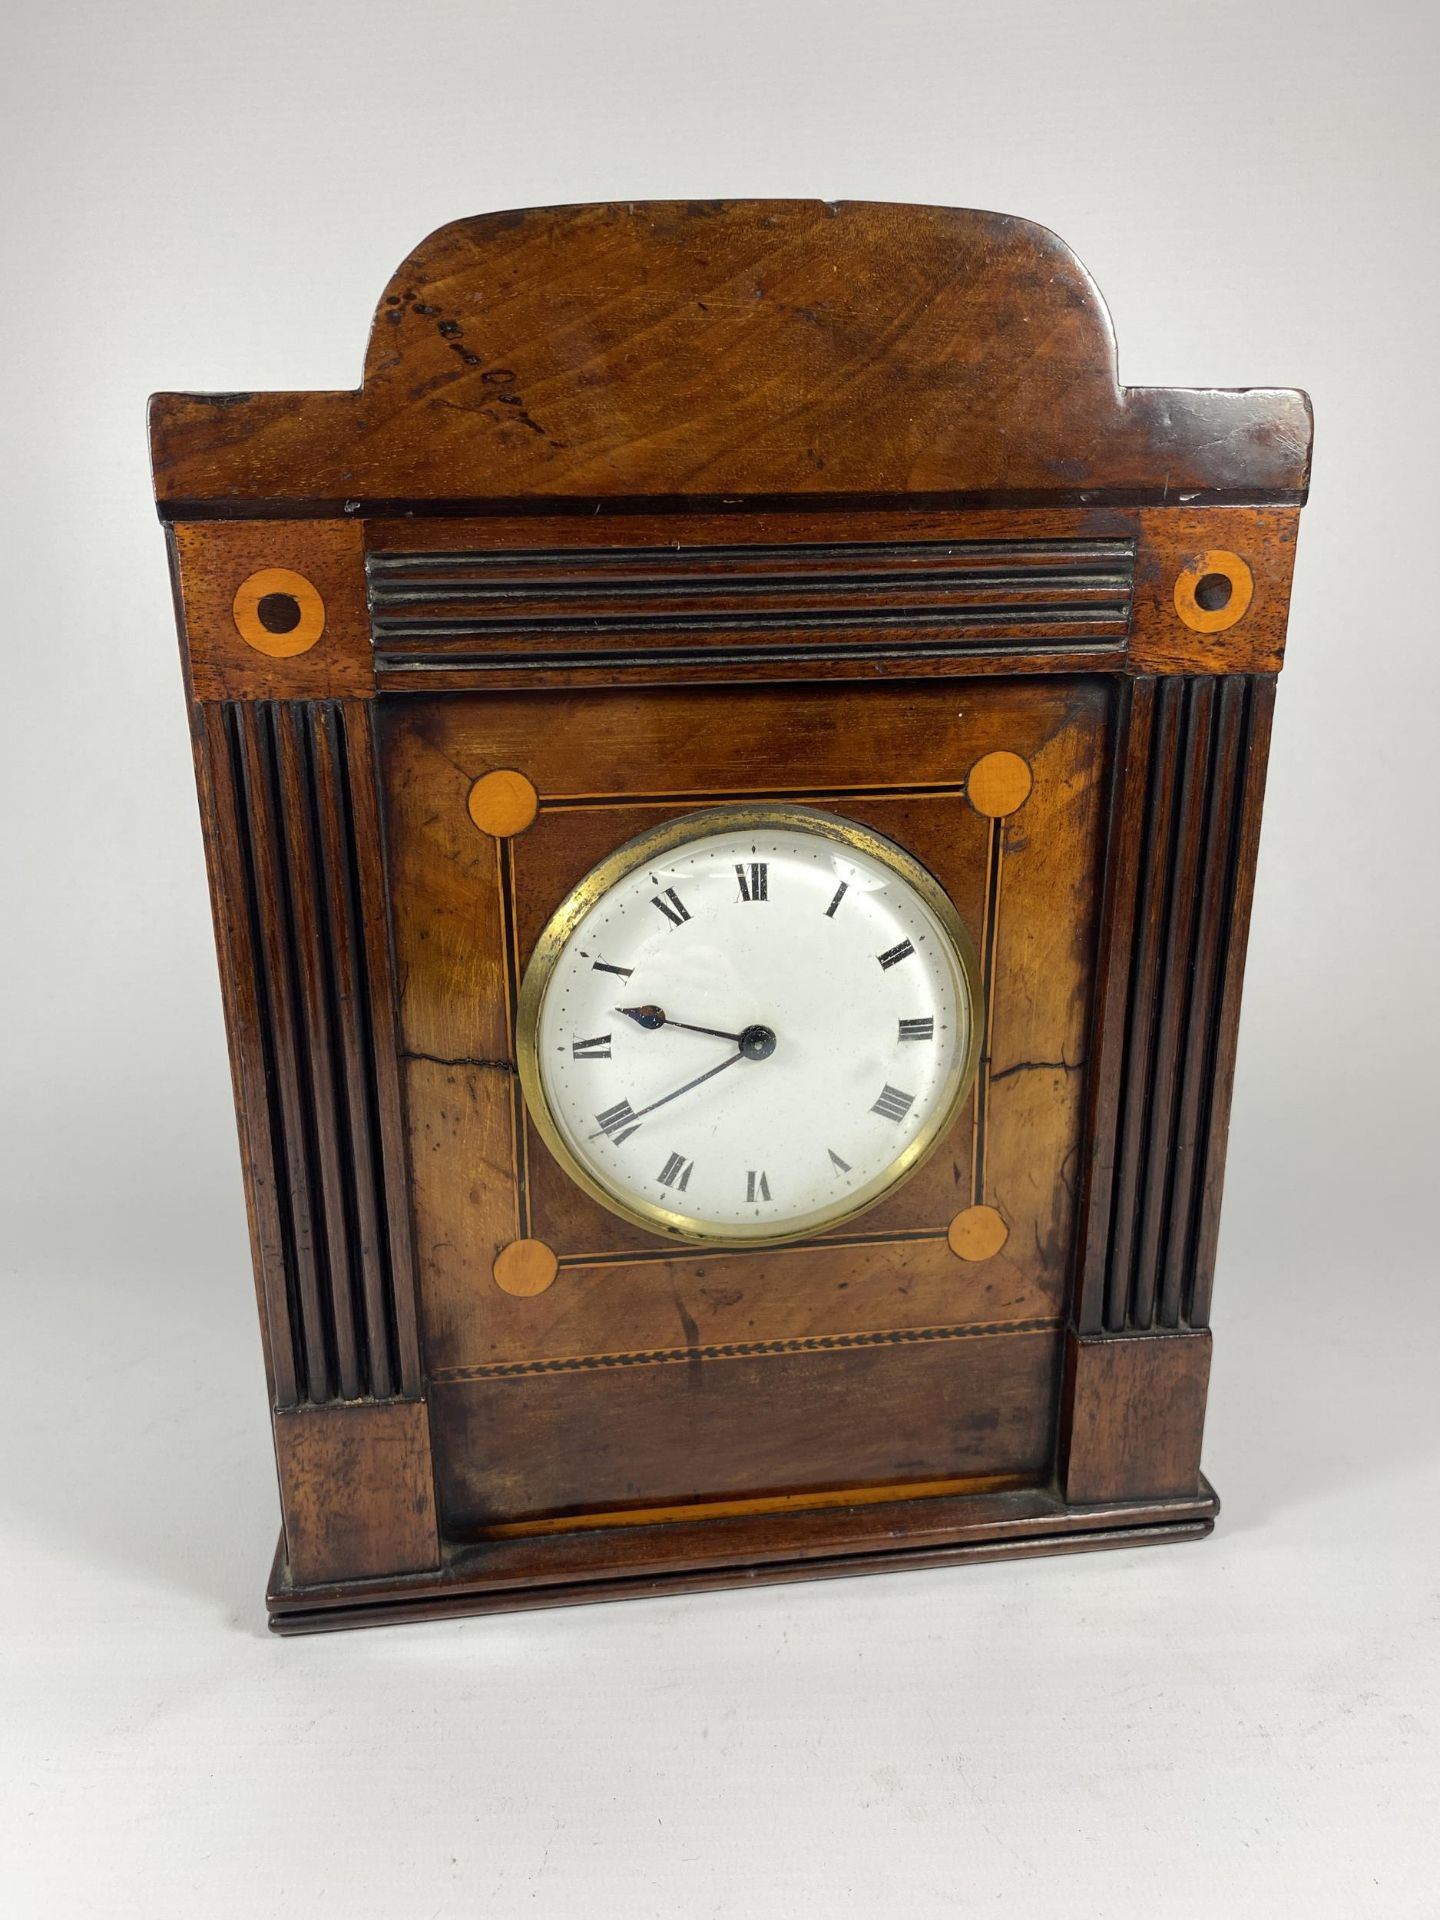 A 19TH CENTURY INLAID MAHOGANY MANTLE CLOCK WITH ROMAN NUMERALS AND ENAMEL DIAL, HEIGHT 28CM